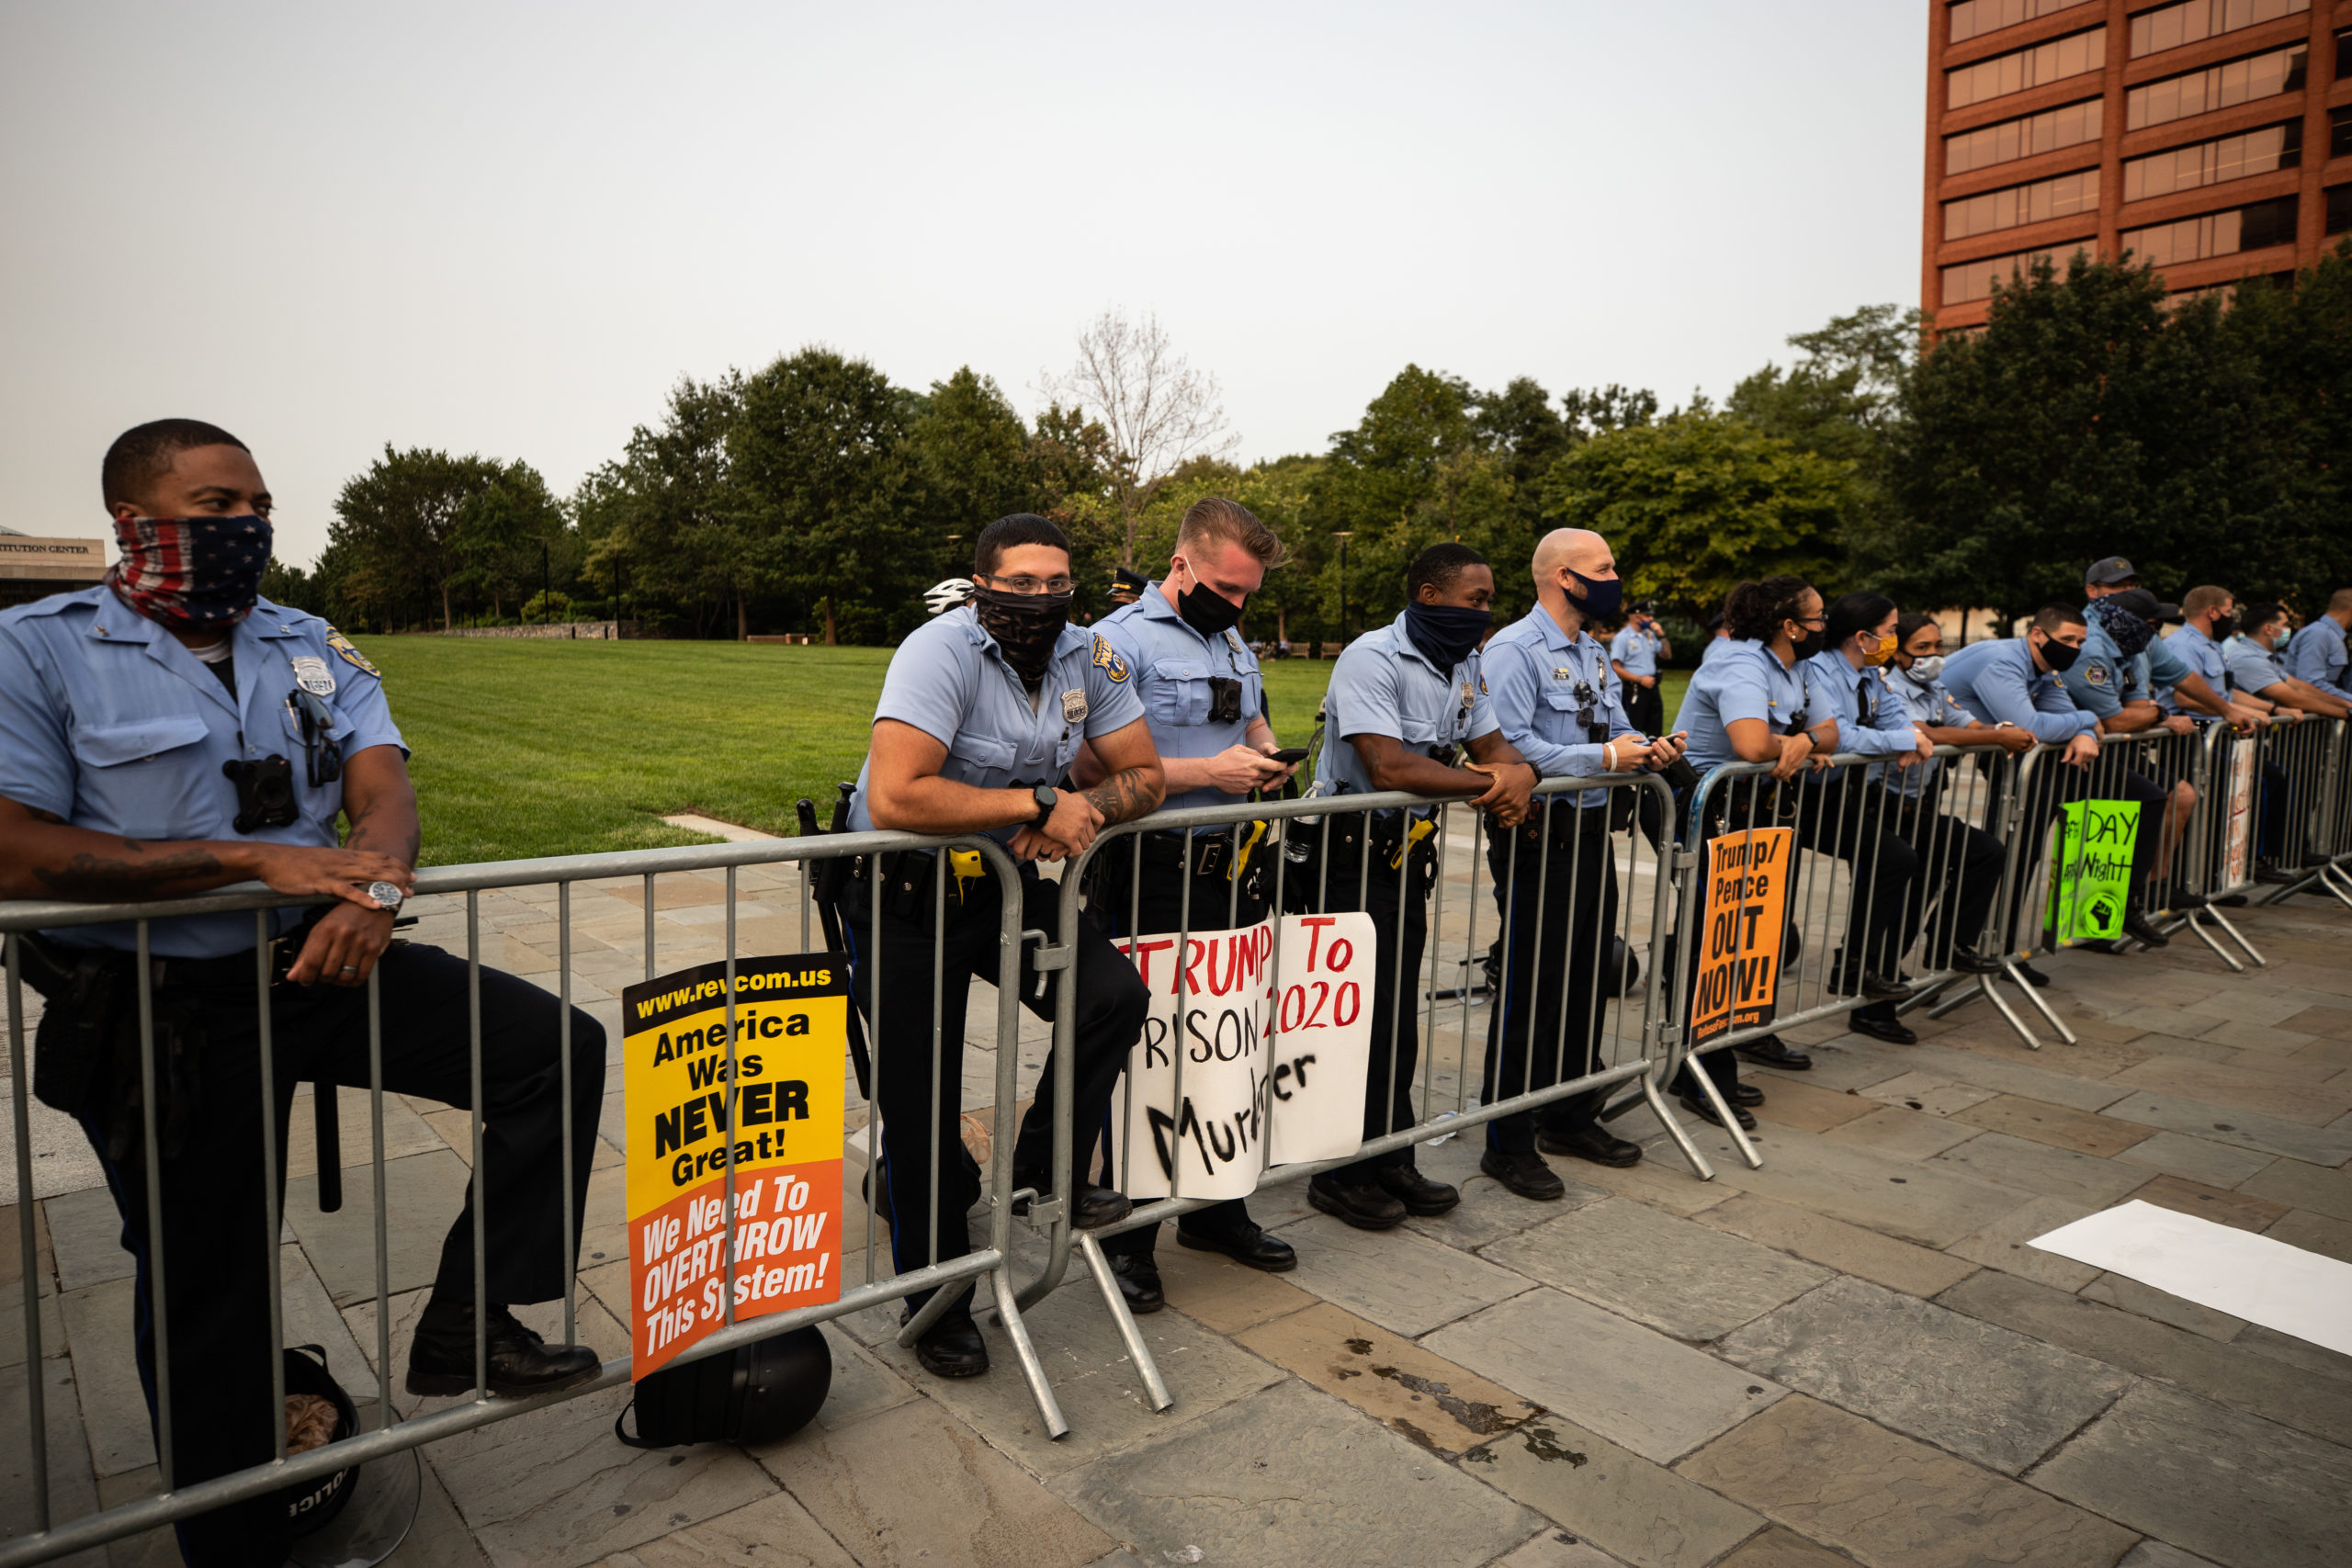 Police officers watch protesters in Philadelphia, Pennsylvania on Sept. 15, 2020. (Photo: Kaylee Greenlee / DCNF)